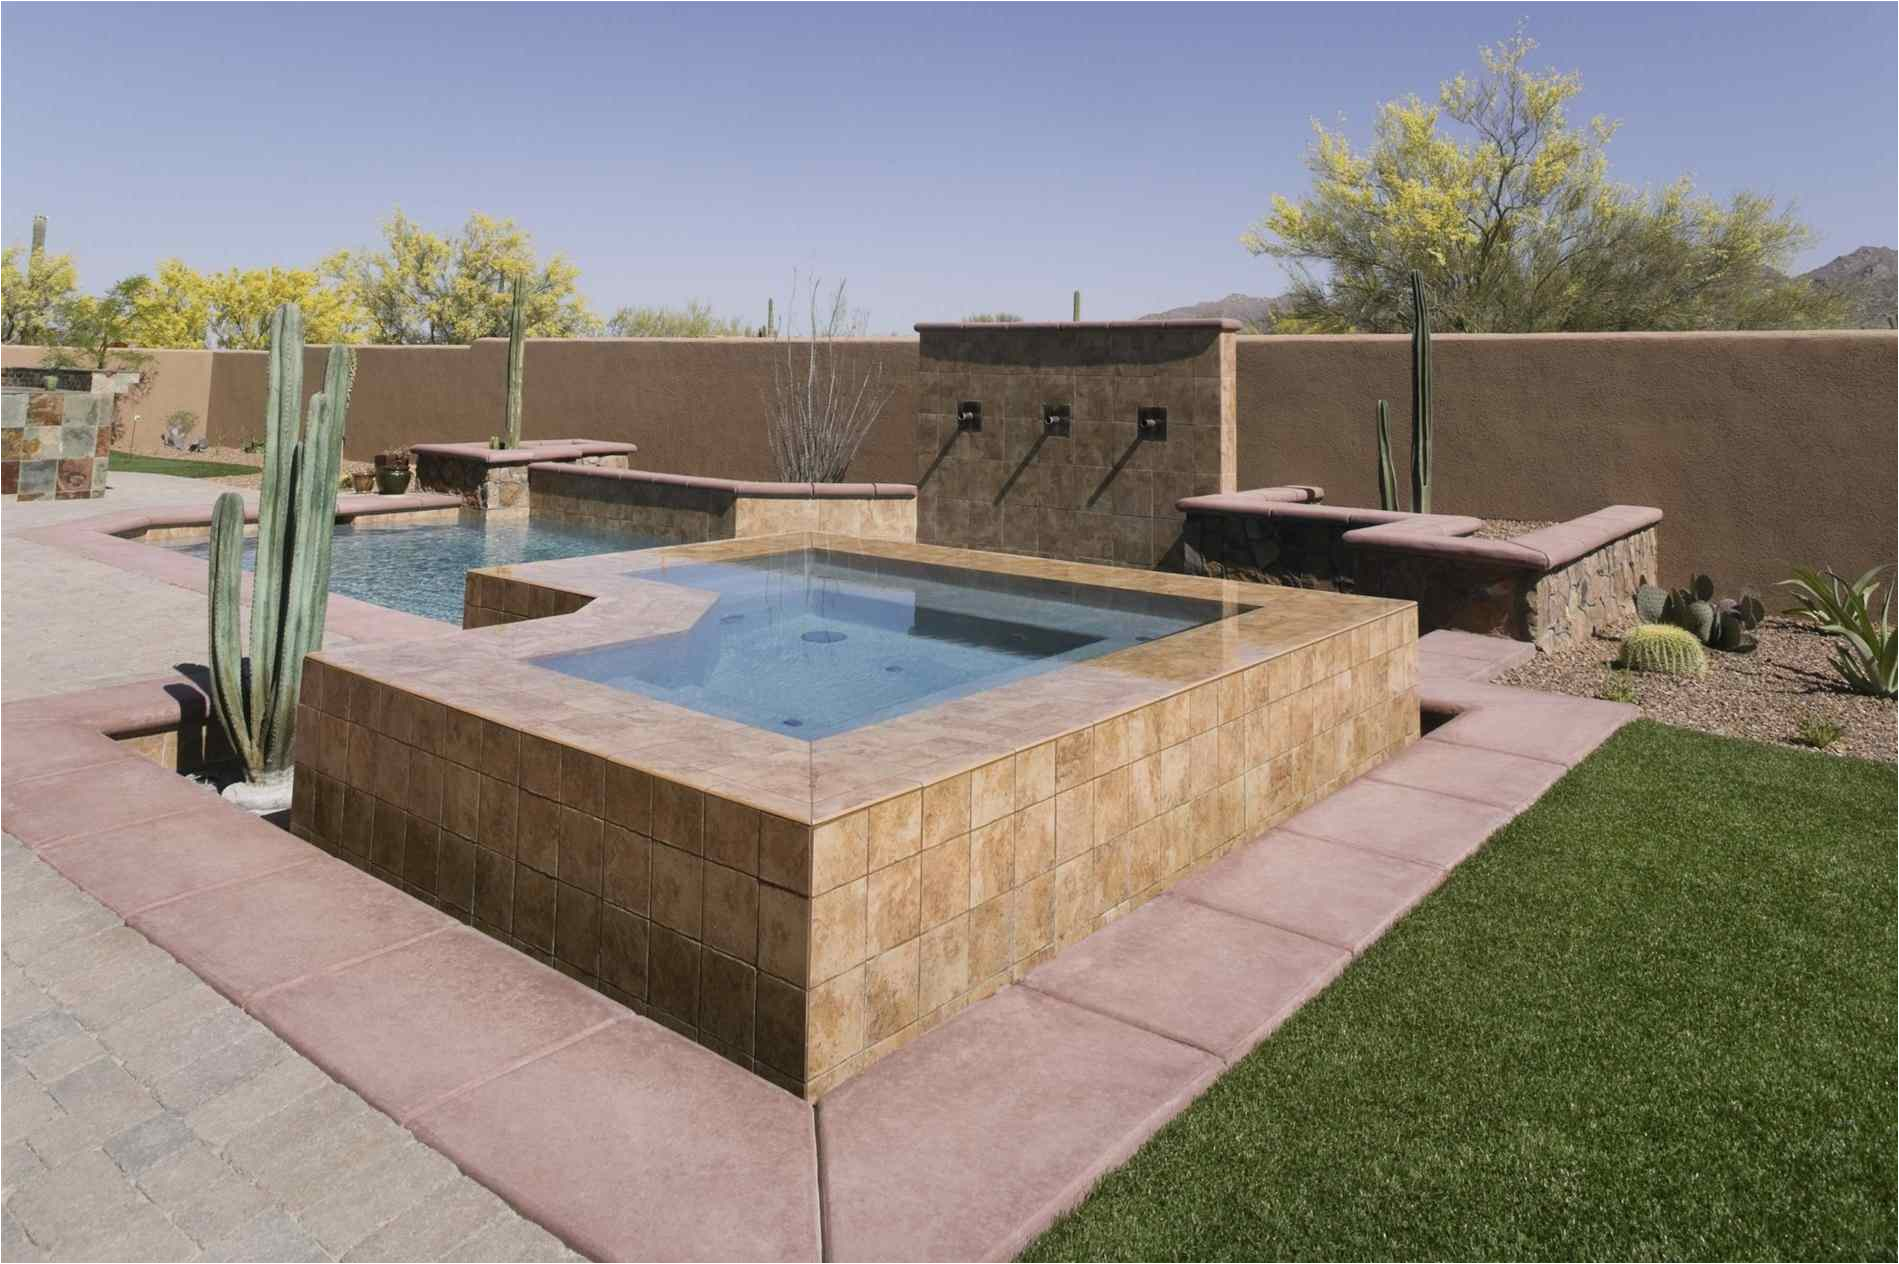 elegant costco jacuzzi with remarkable design and feature for outdoor or indoor bathroom